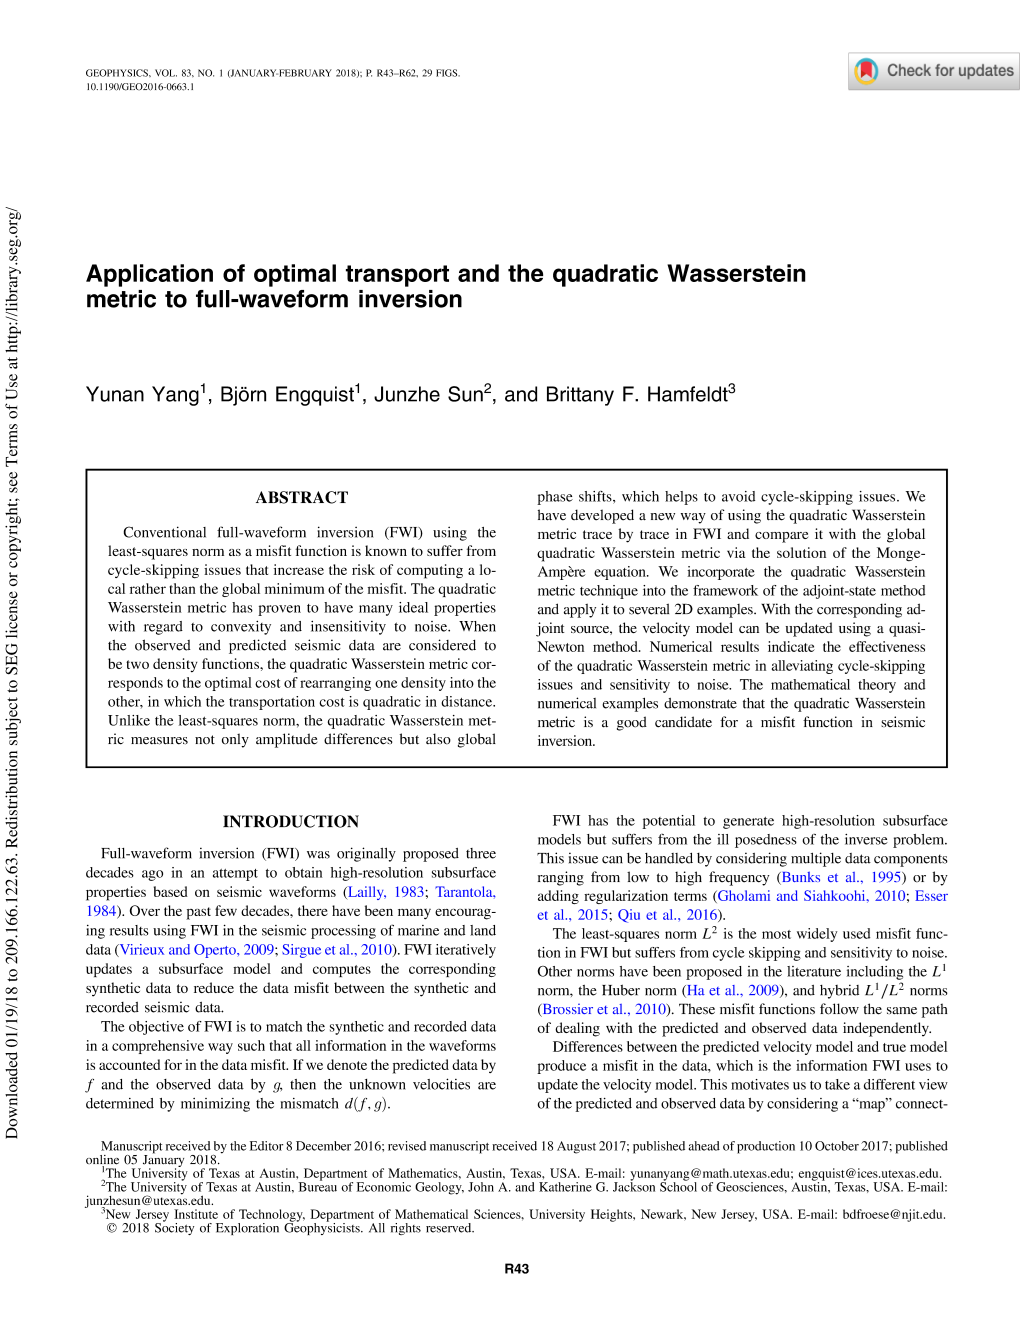 Application of Optimal Transport and the Quadratic Wasserstein Metric to Full-Waveform Inversion